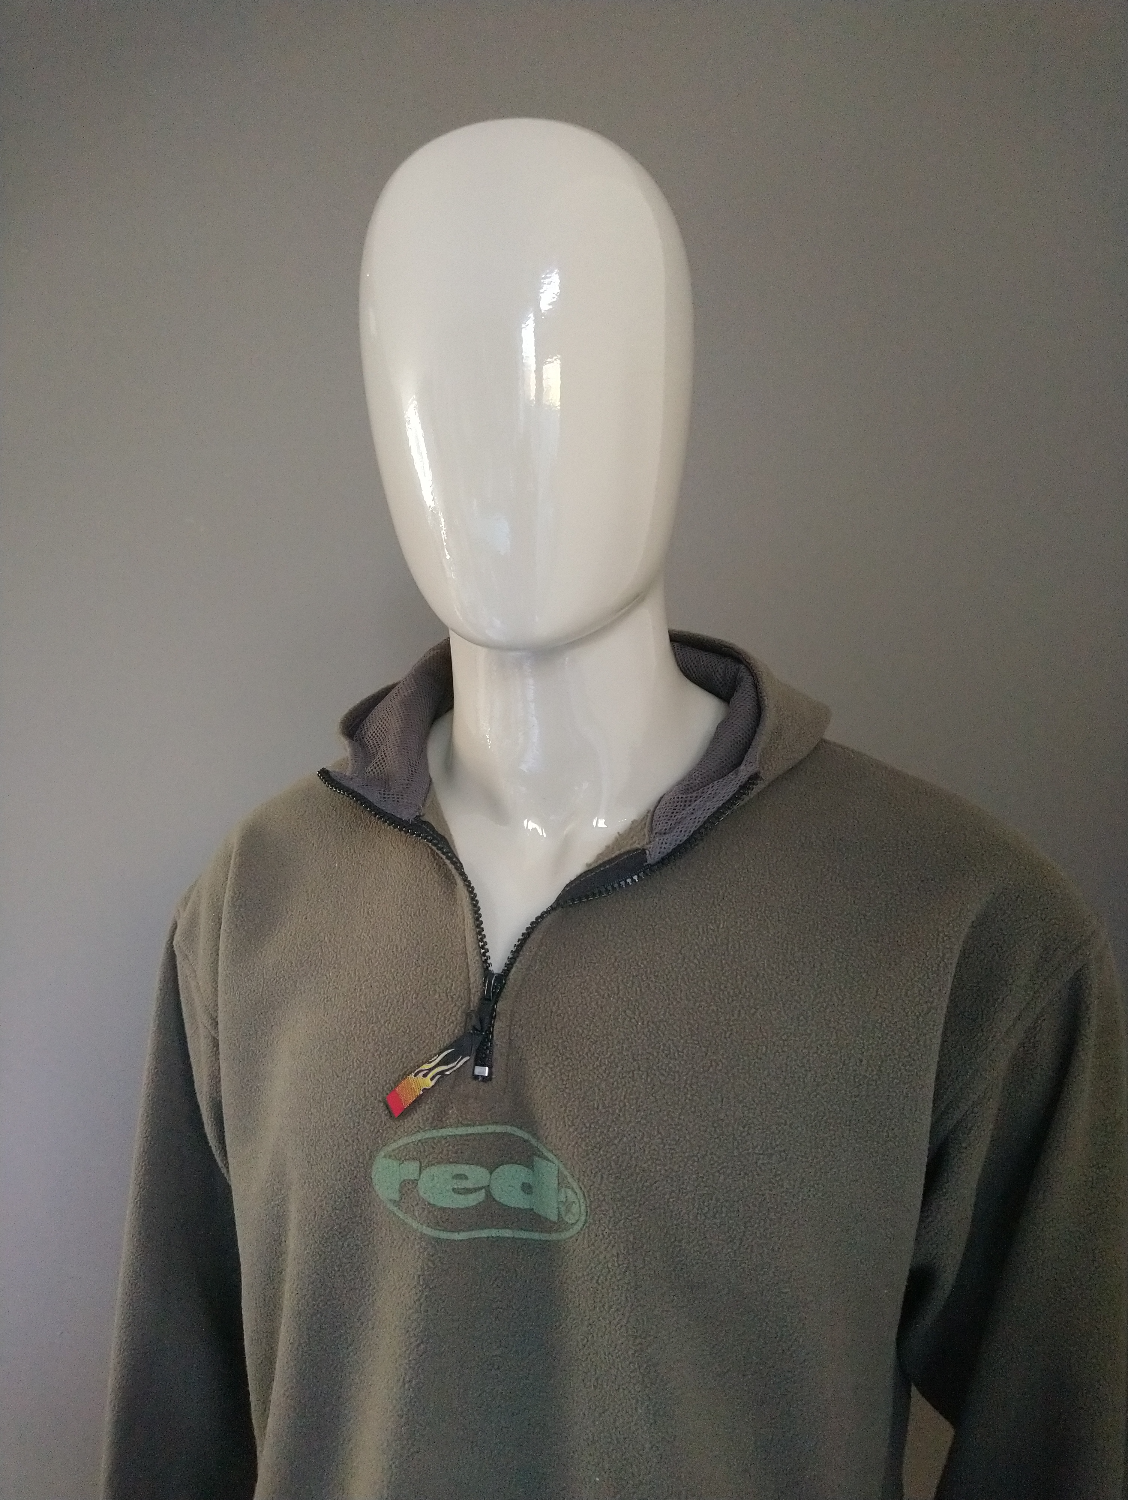 Red fleece hoodie with zipper. Green colored. Size L.